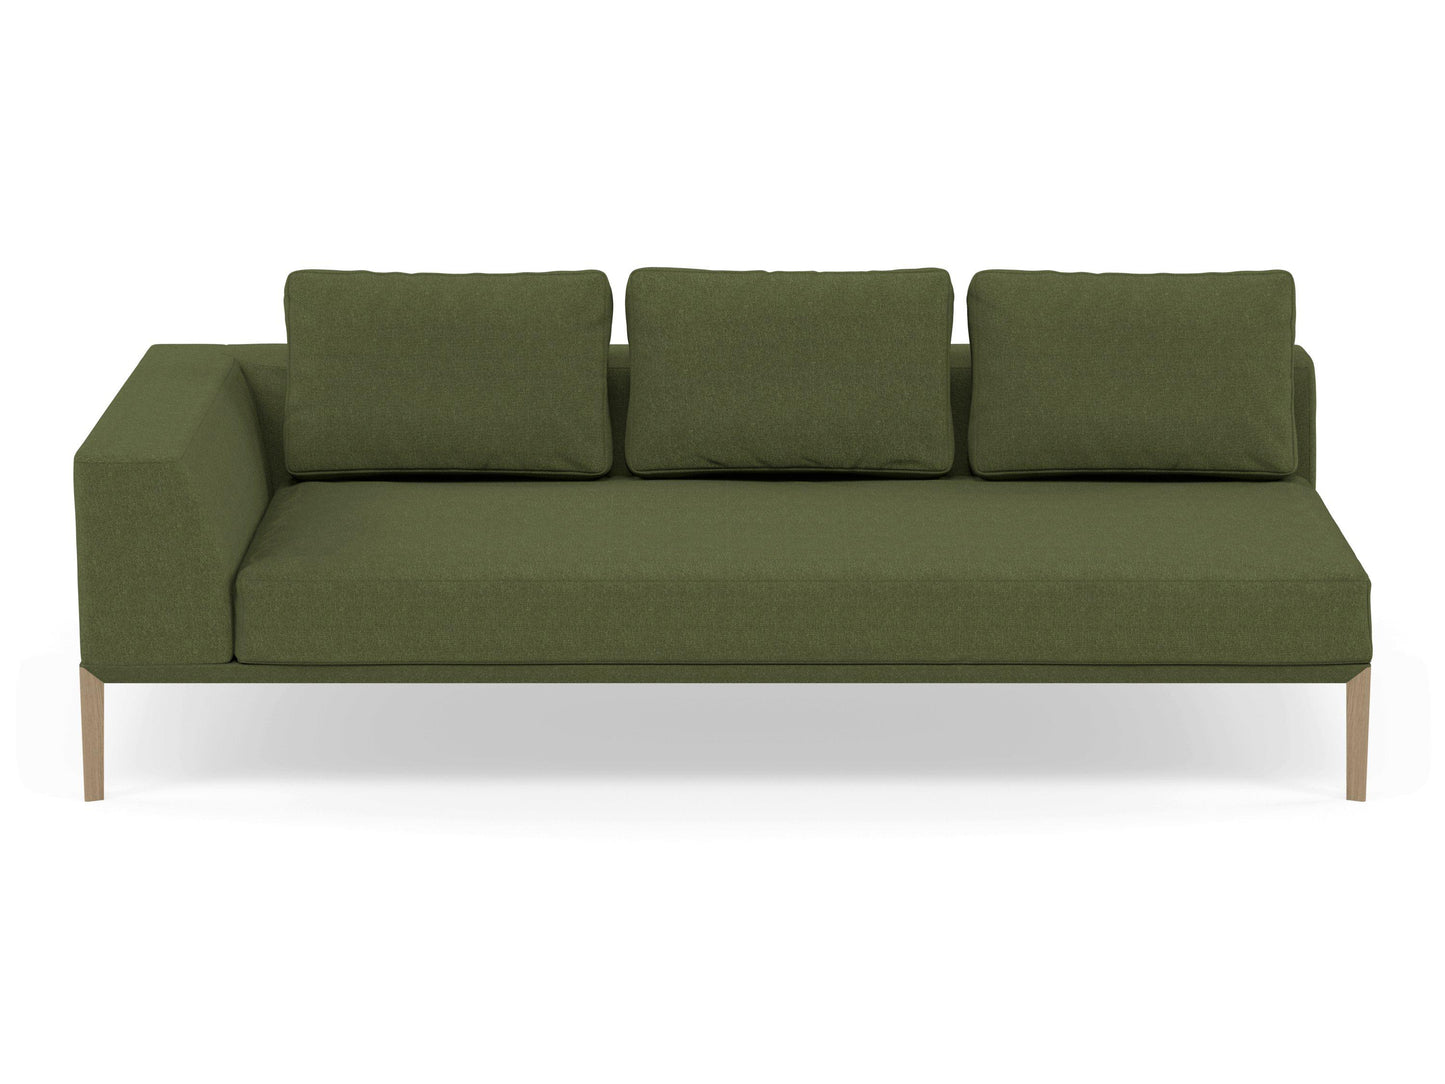 Modern 3 Seater Chaise Lounge Style Sofa with Right Armrest in Seaweed Green Fabric-Natural Oak-Distinct Designs (London) Ltd